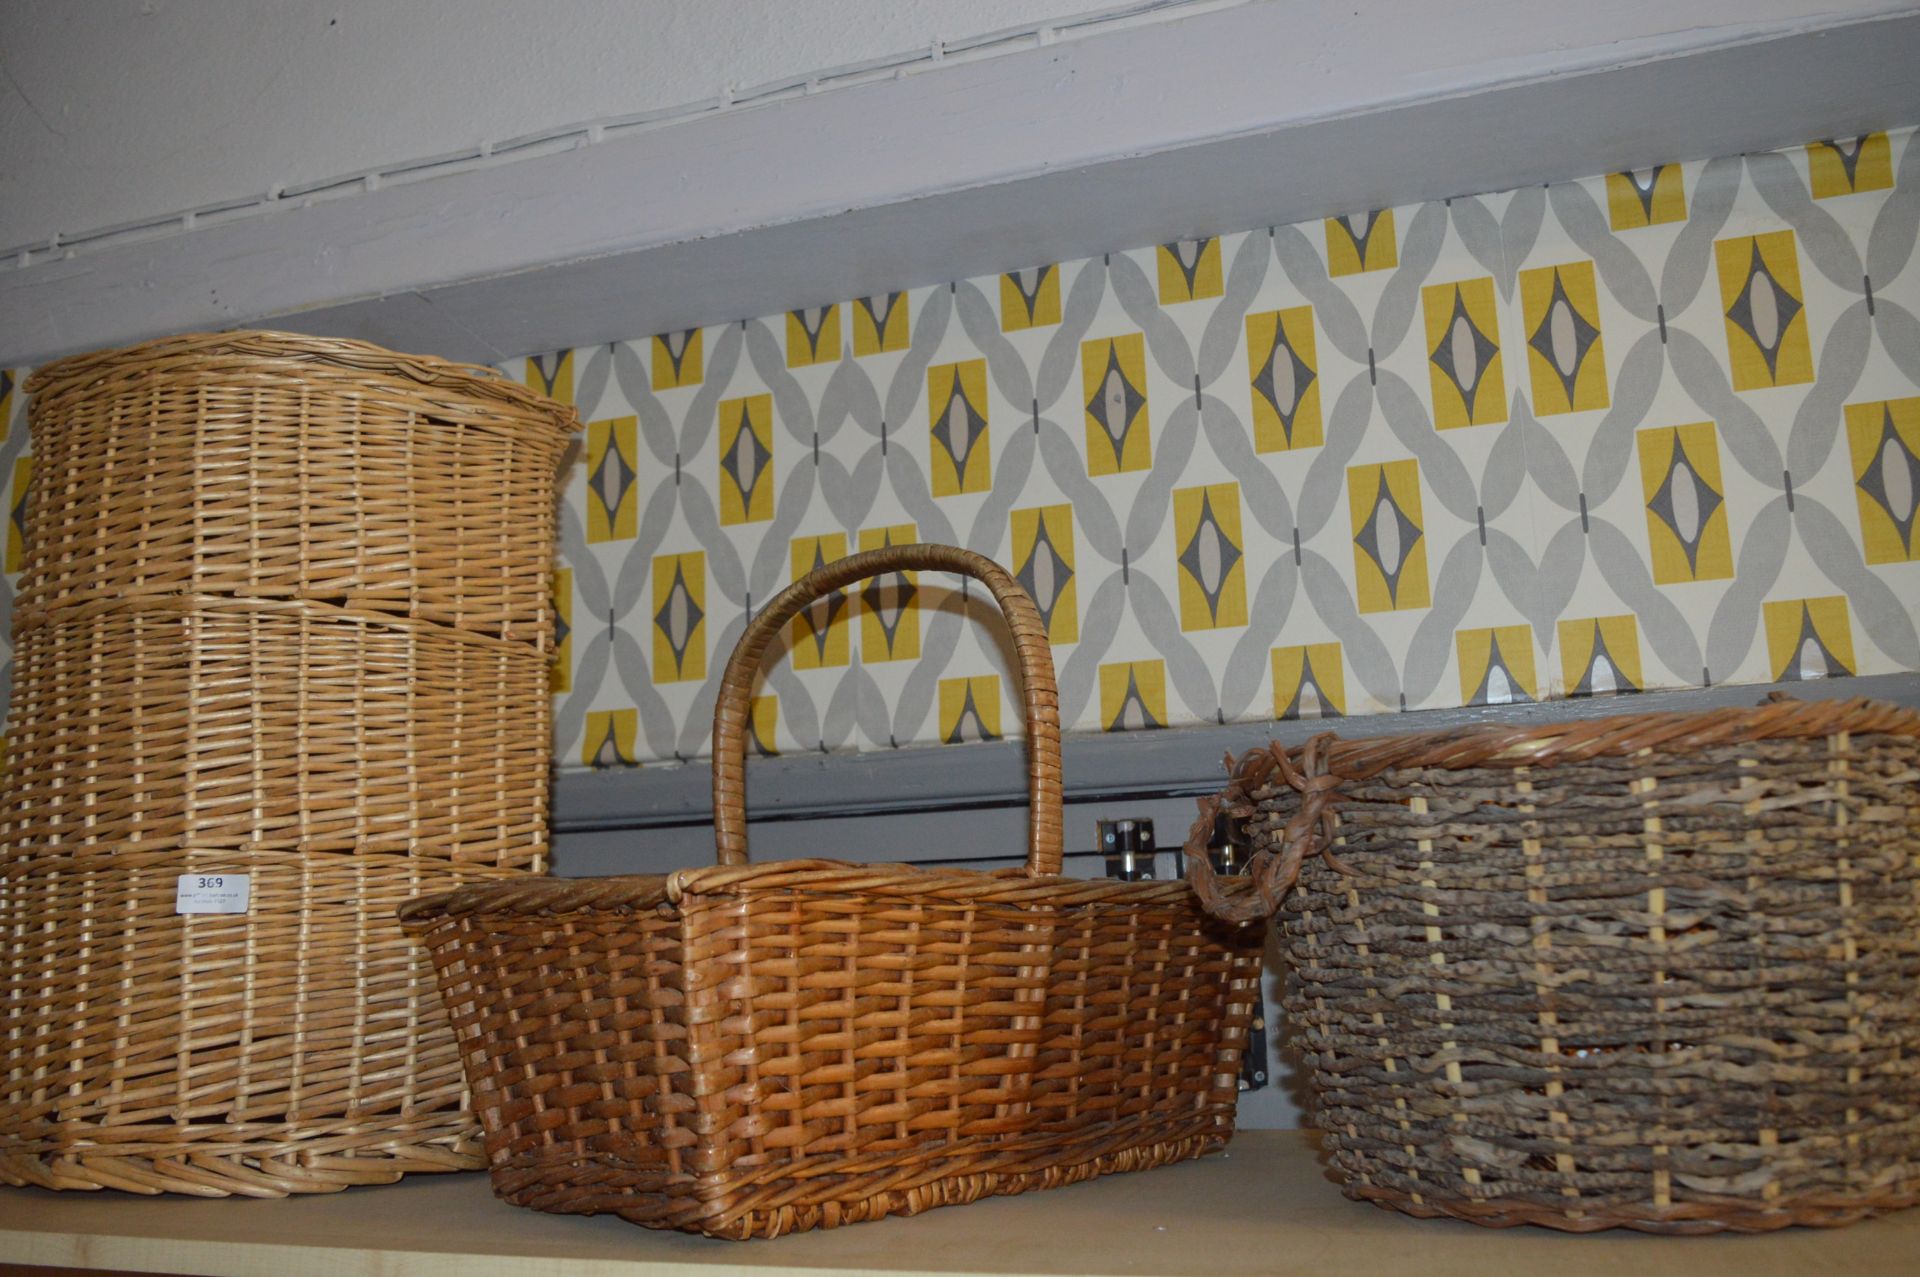 Two Cane Baskets and a Laundry Basket